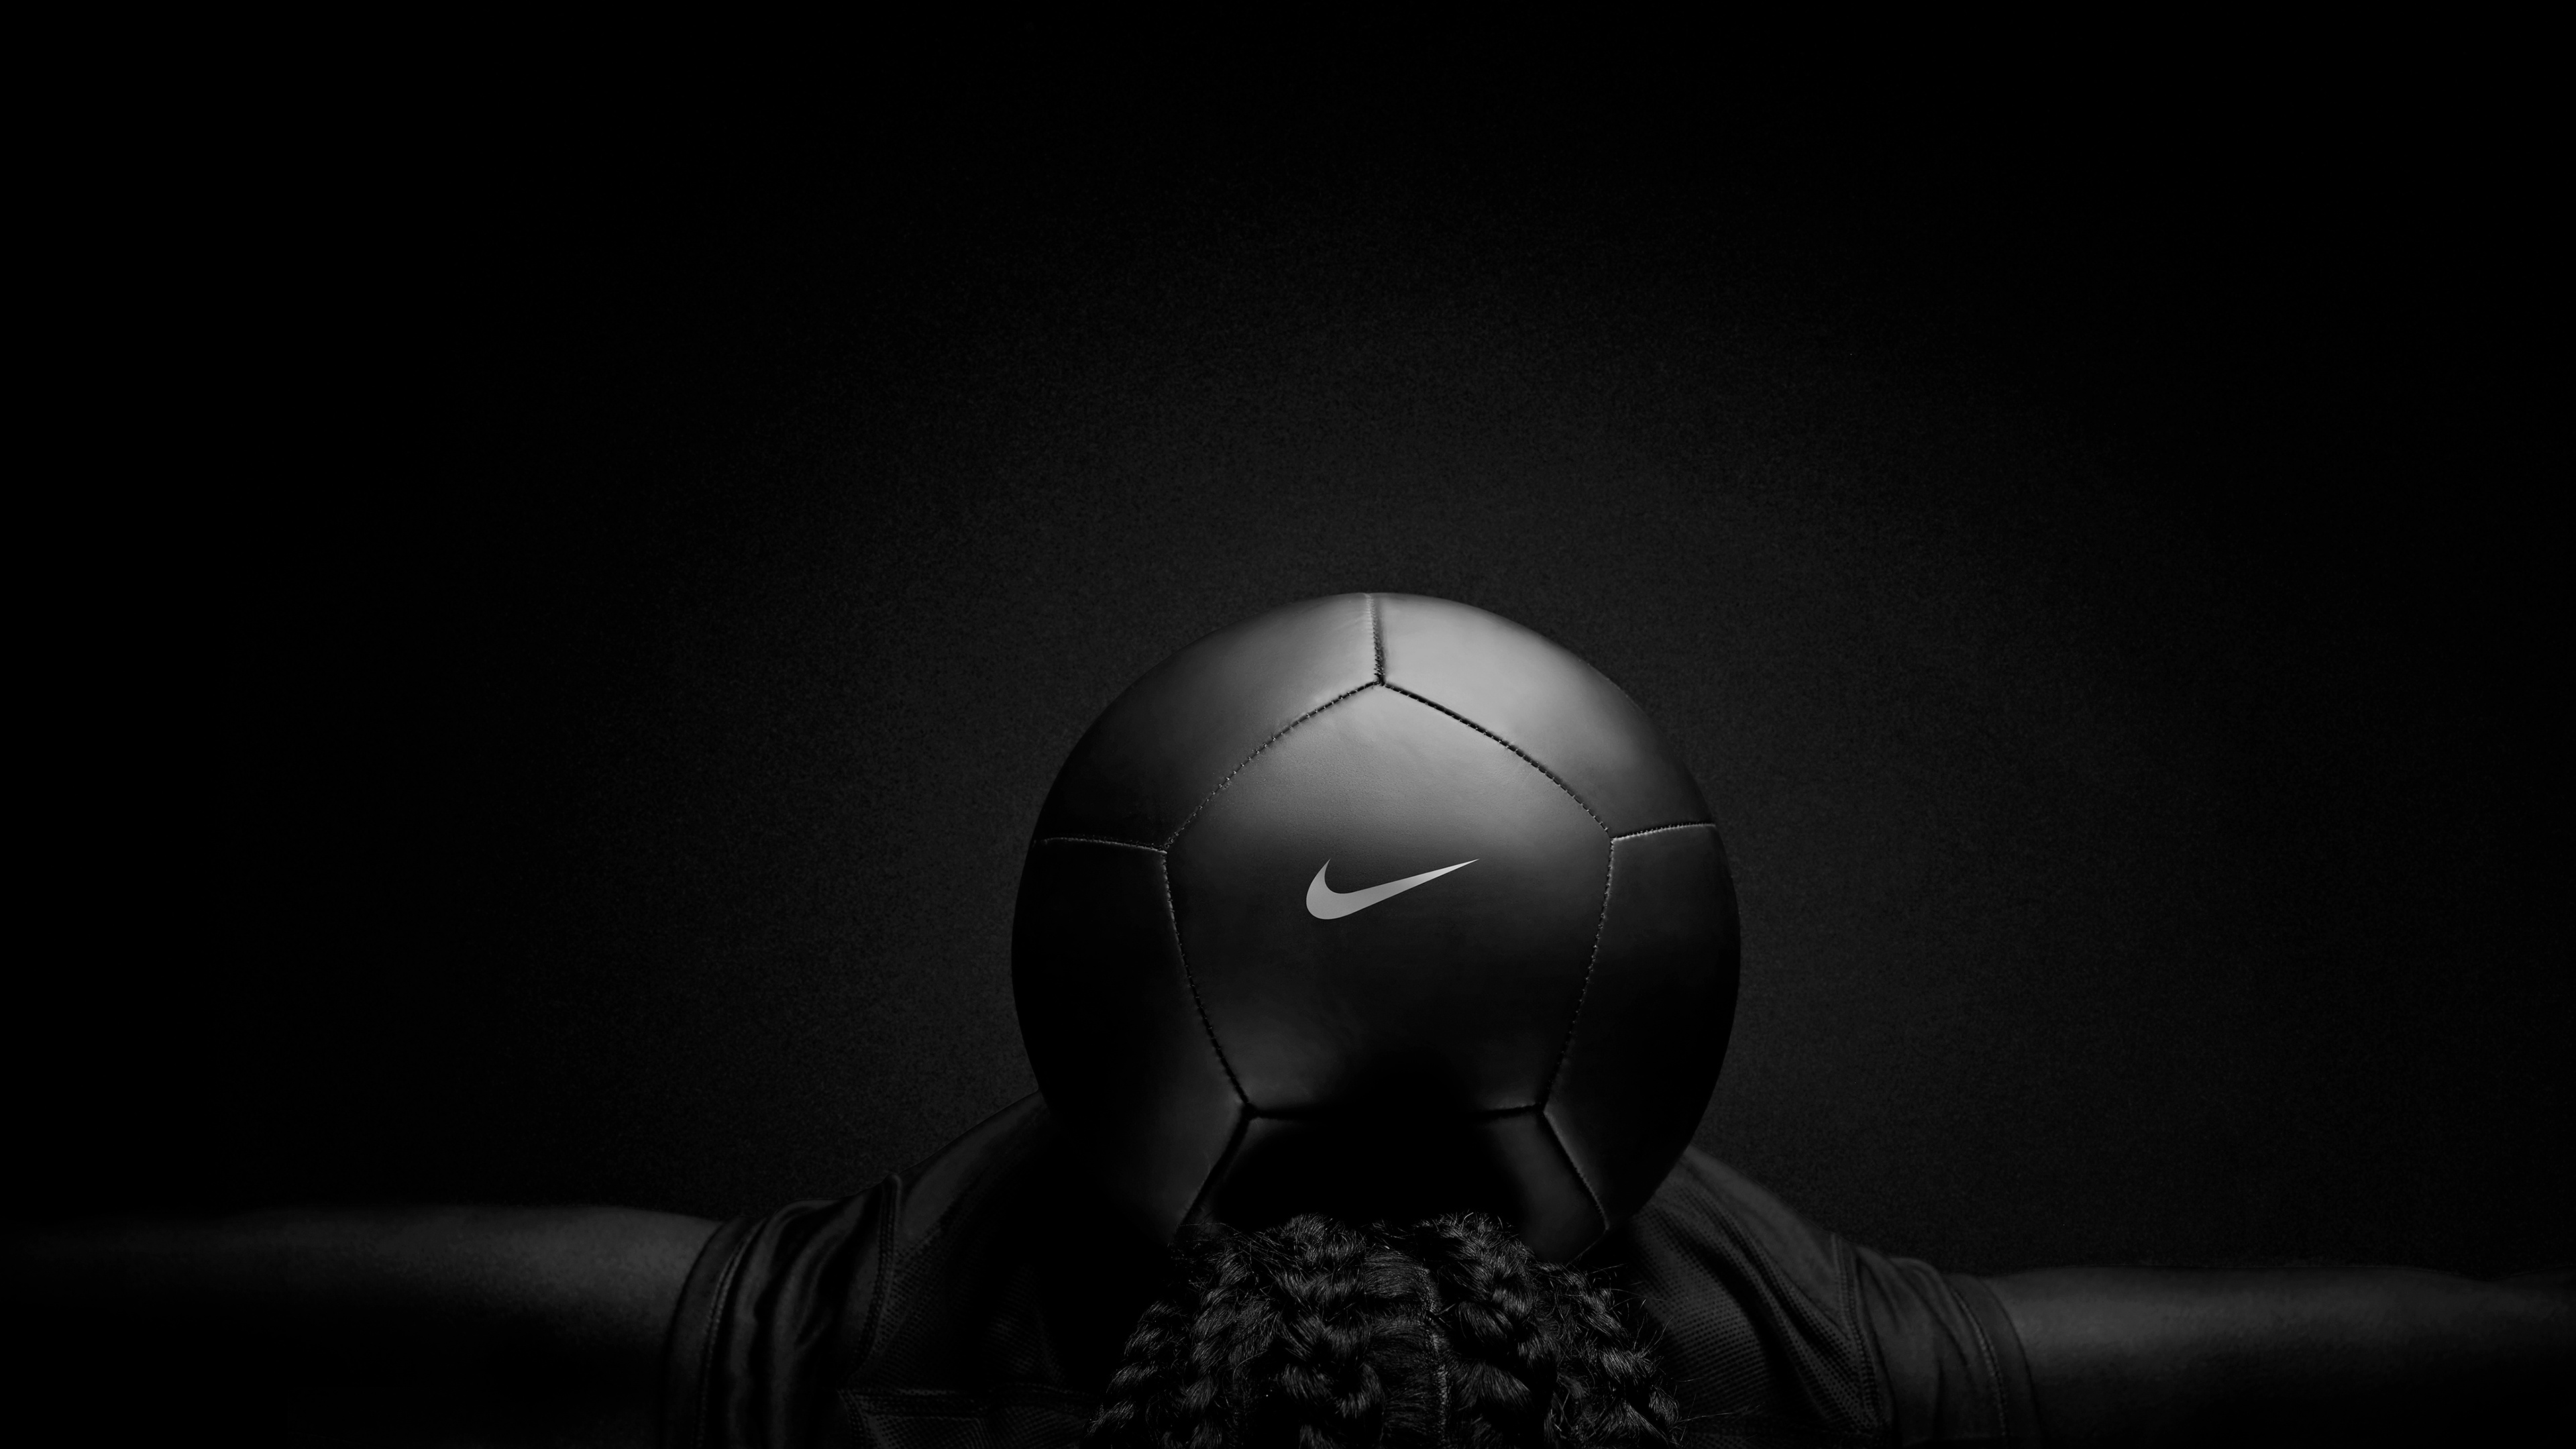 Grayscale Photo of Soccer Ball. Wallpaper in 3840x2160 Resolution